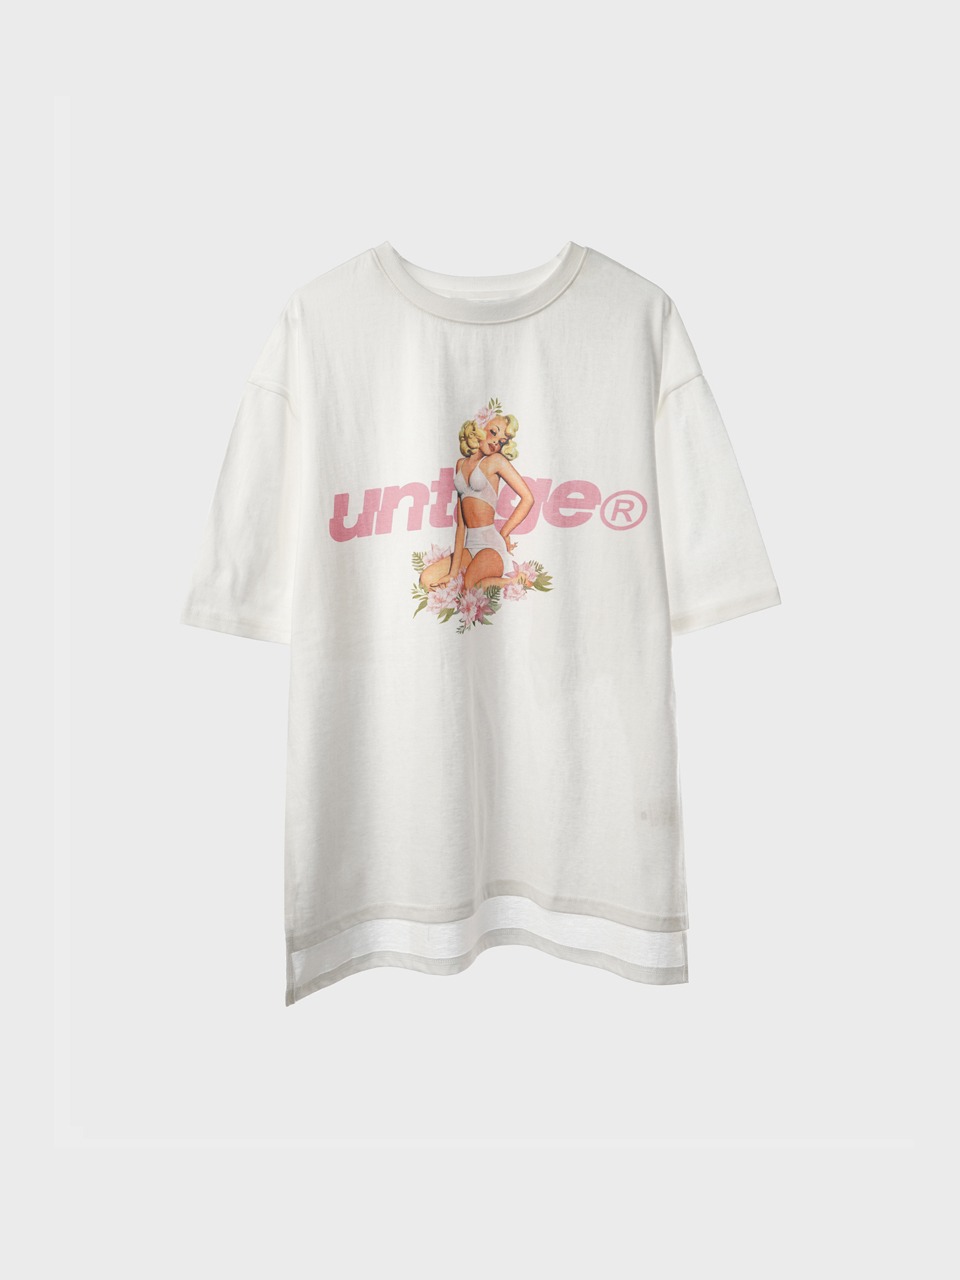 Untage Archive Pin up T-Shirts